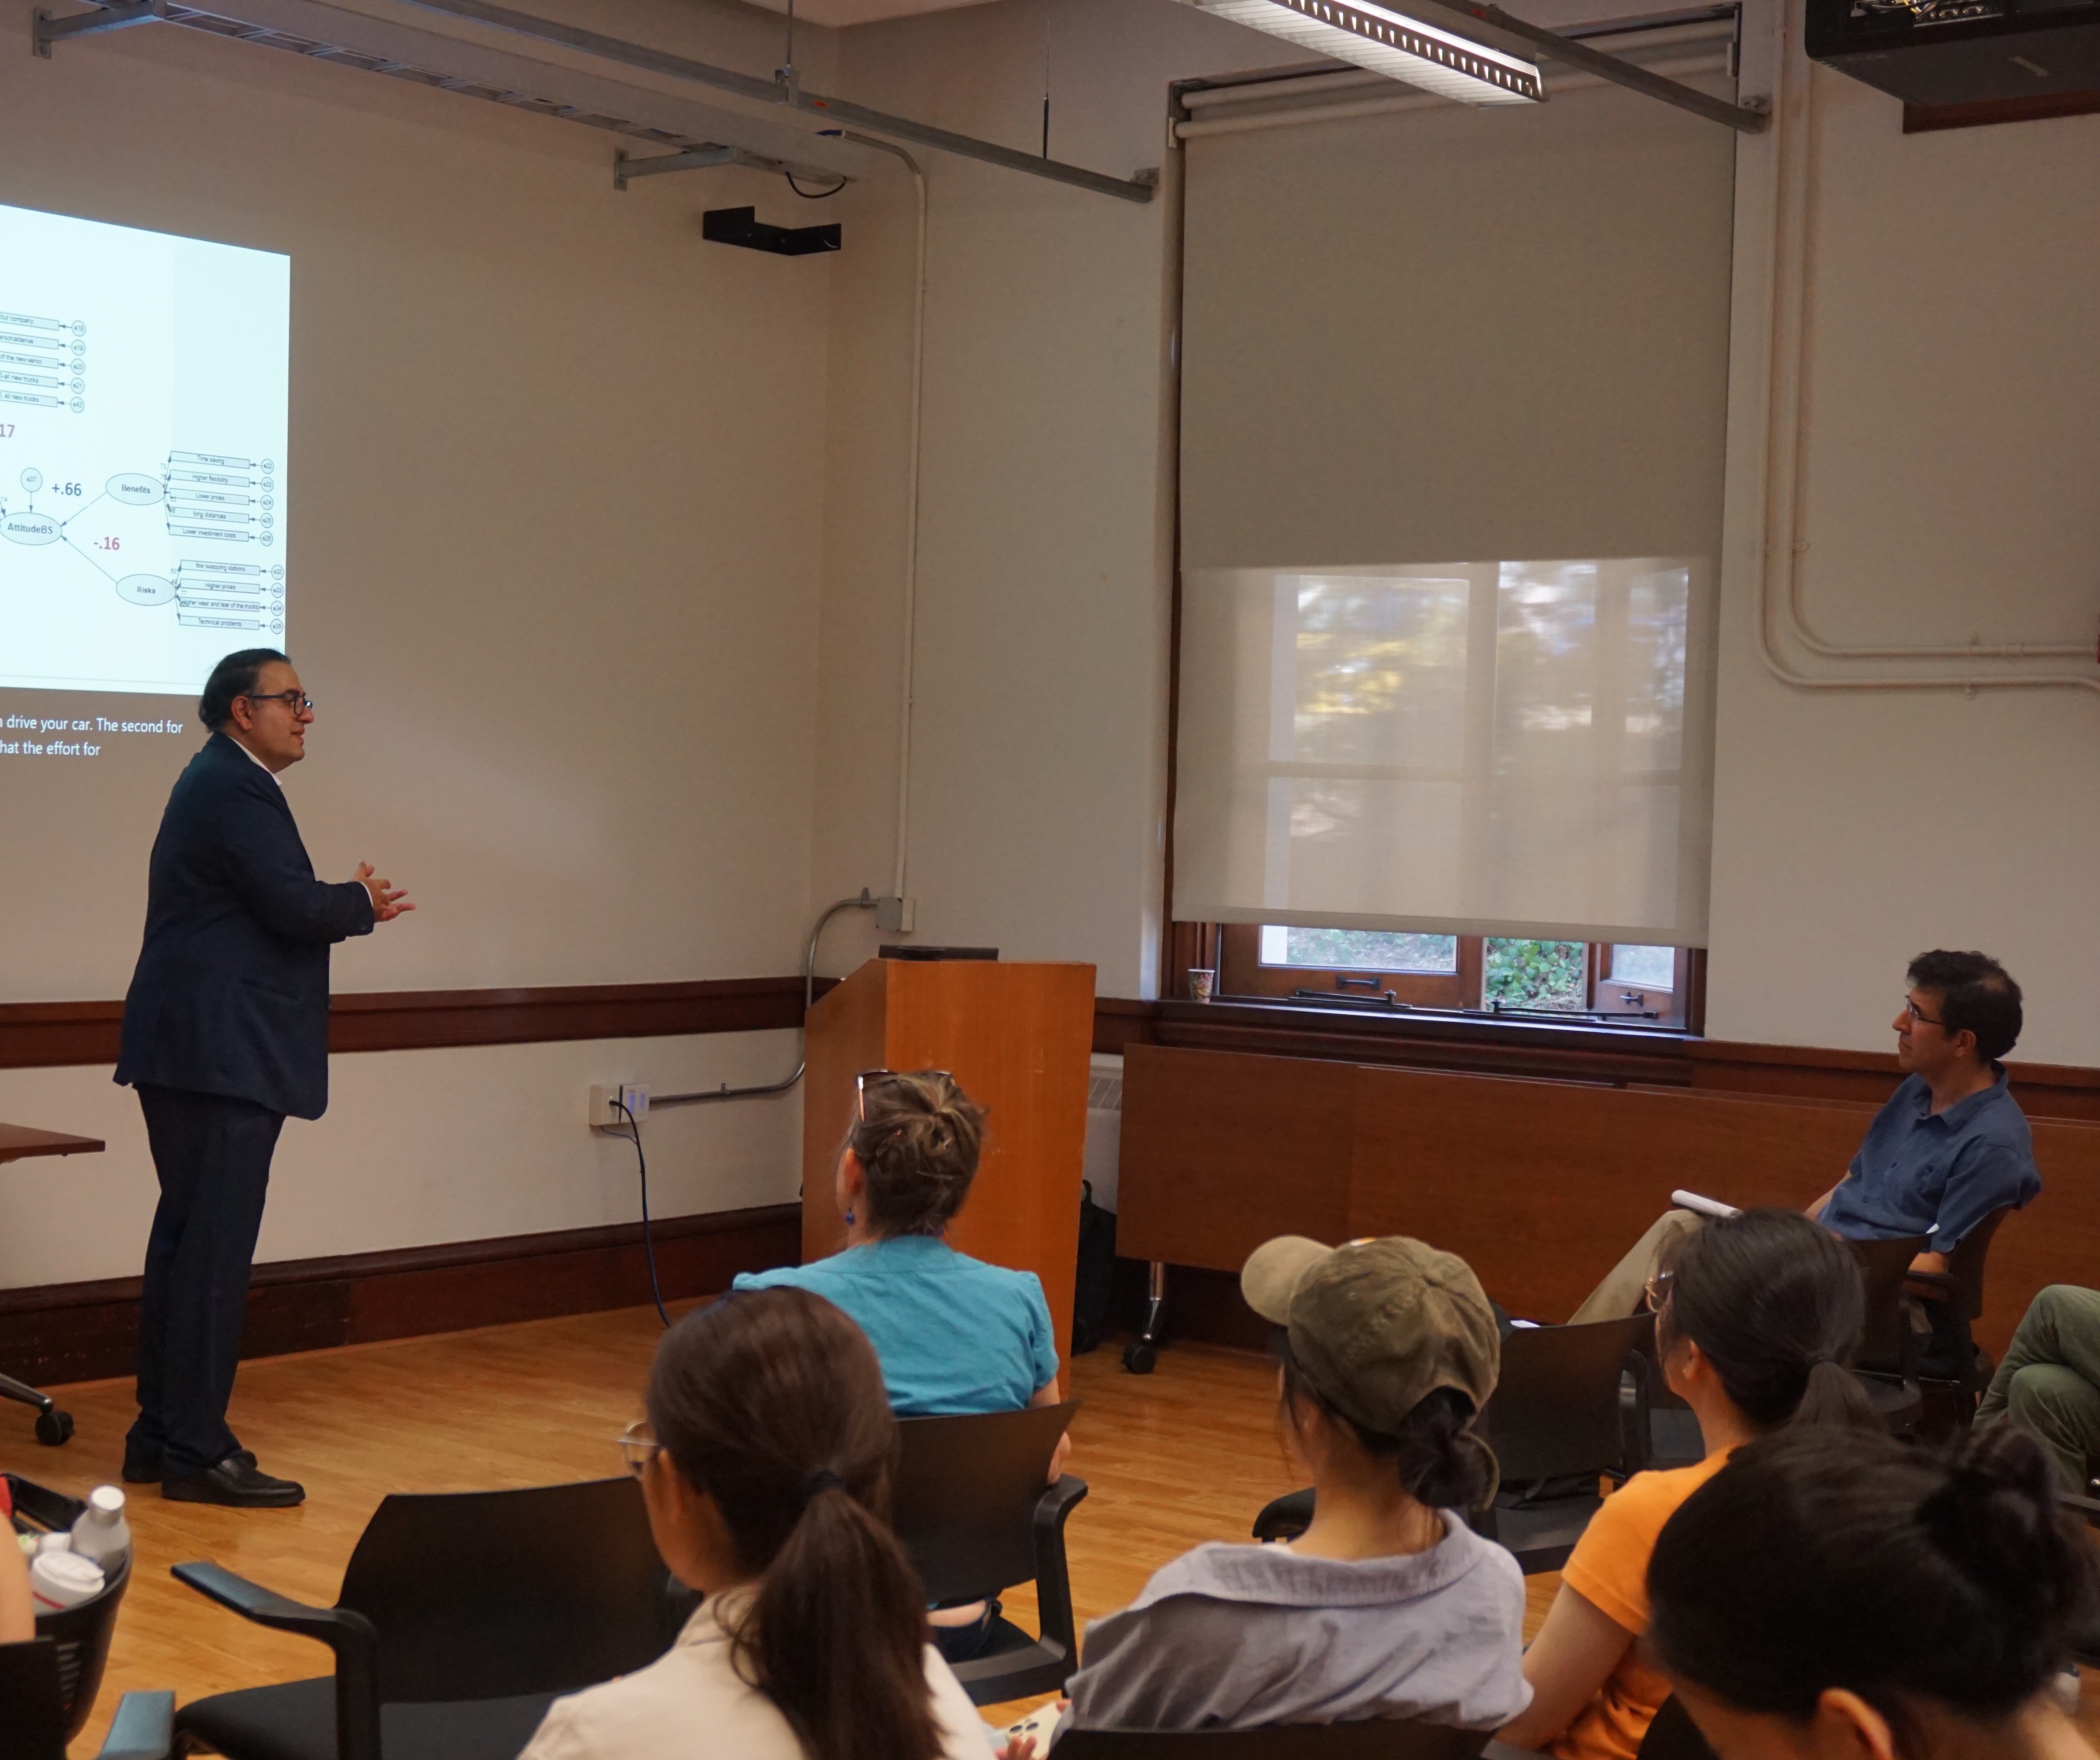 Dr. Hamid Mostofi, Professor of Data Science and Artificial Intelligence at SRH Berlin University of Applied Sciences and Senior Researcher, Technical University of Berlin, presents at the ITS Transportation Seminar 